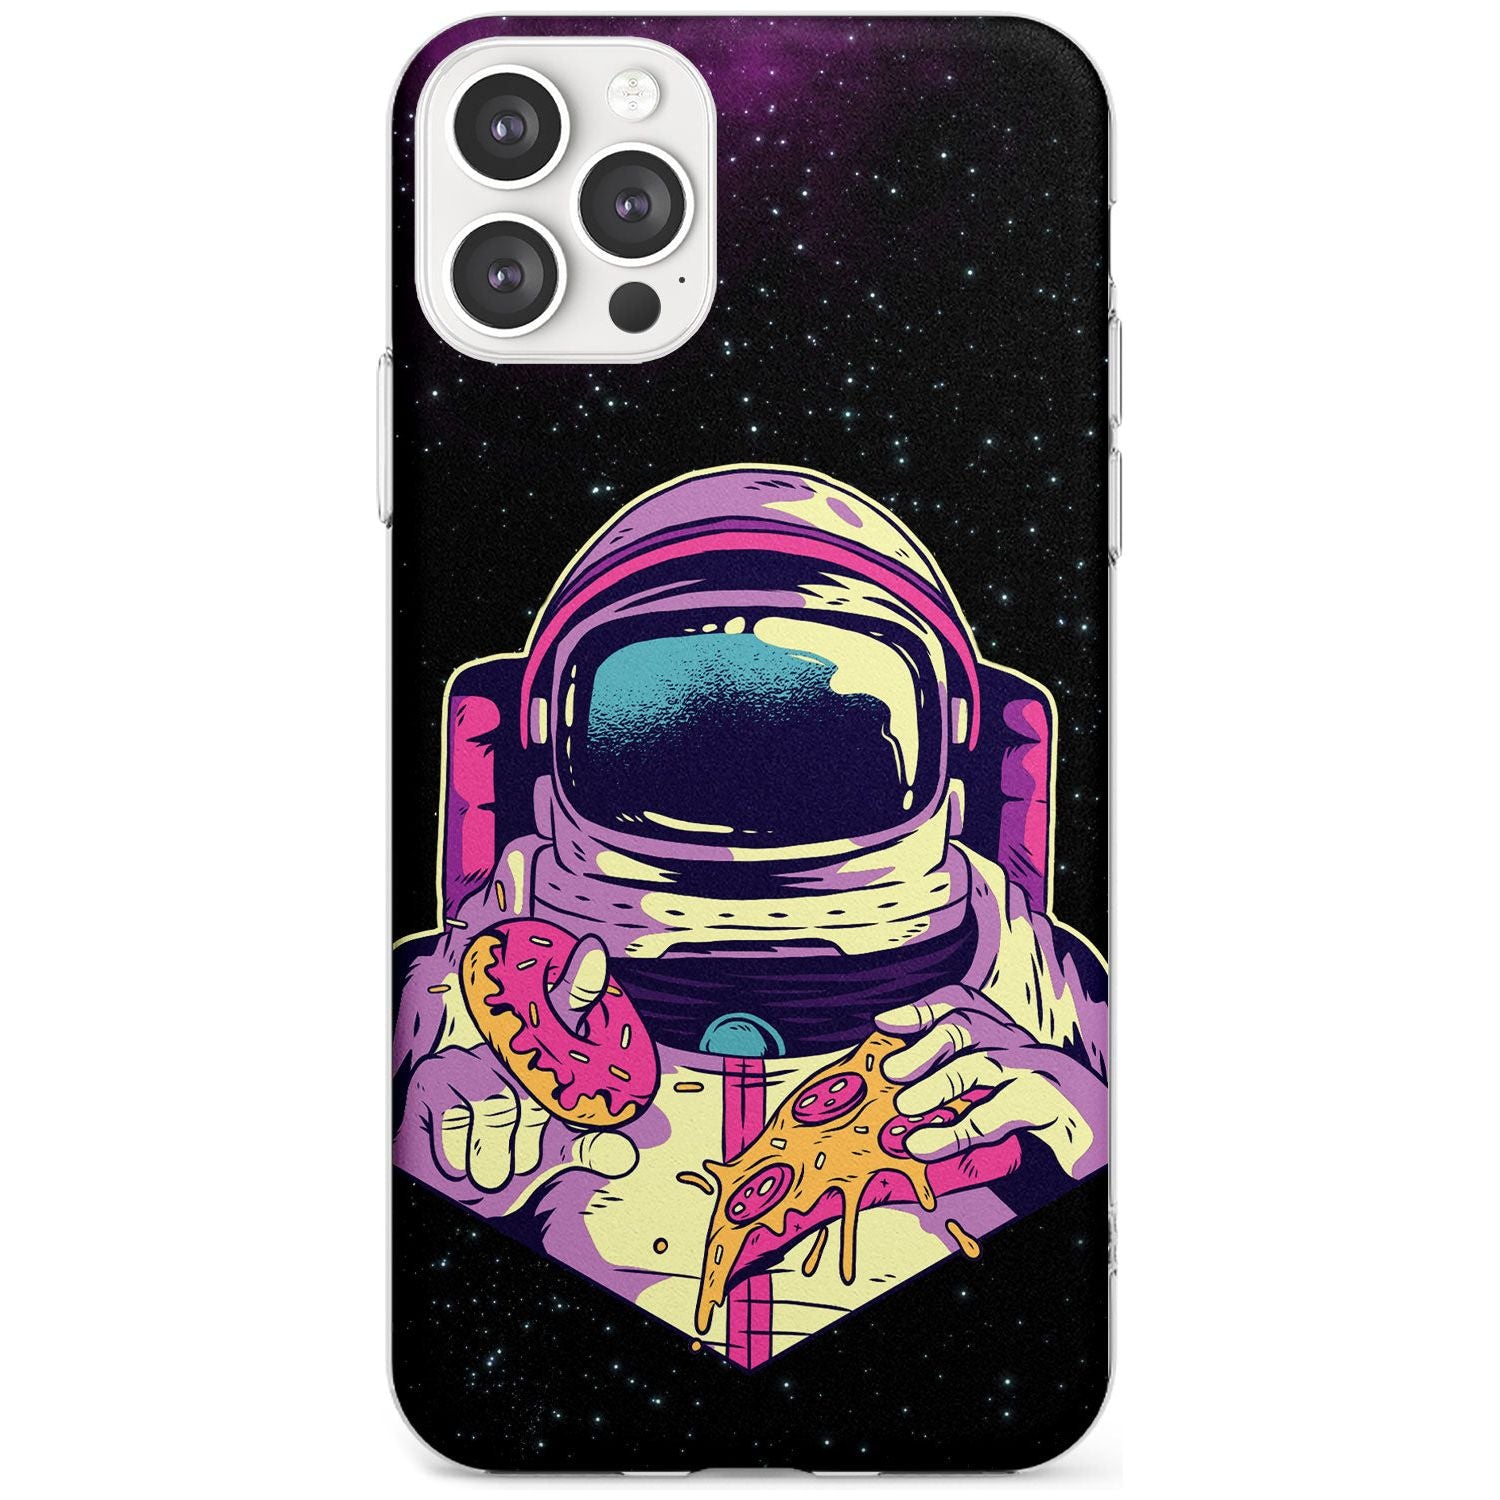 Astro Cheat Meal Slim TPU Phone Case for iPhone 11 Pro Max